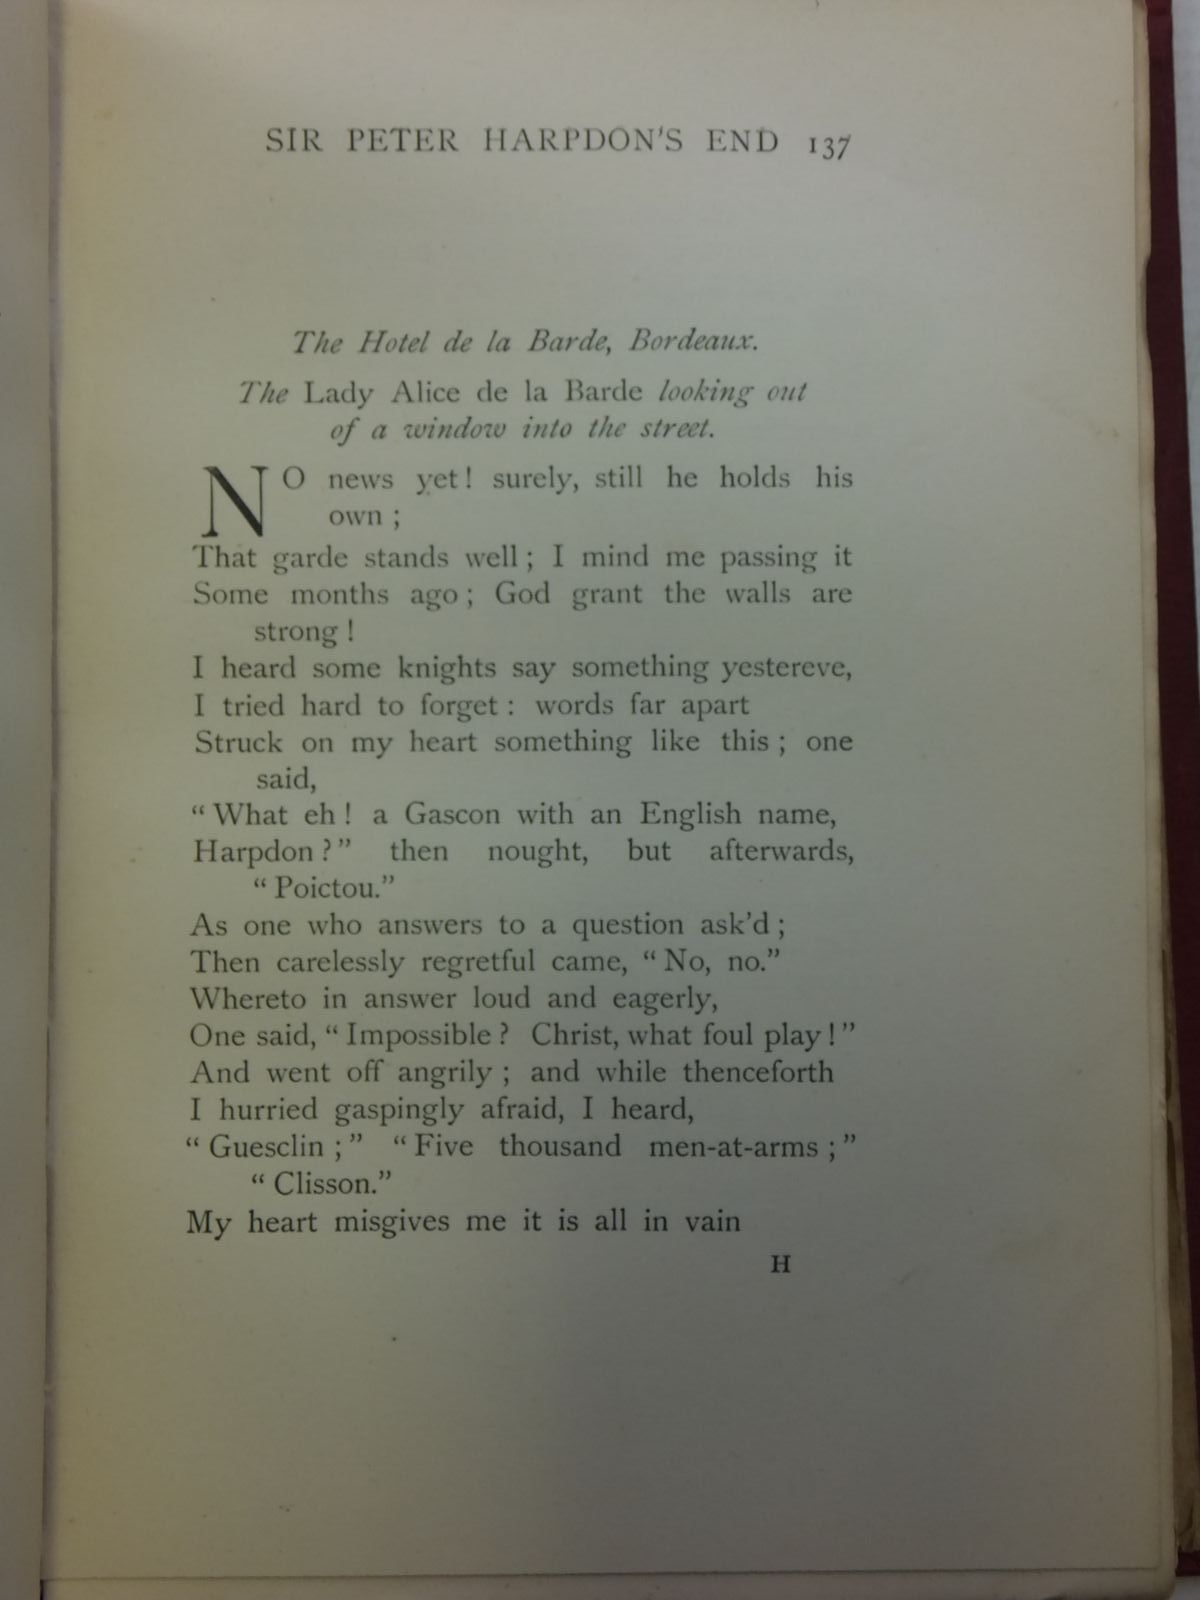 Photo of THE DEFENCE OF GUENEVERE AND OTHER POEMS written by Morris, William illustrated by King, Jessie M. published by John Lane, The Bodley Head (STOCK CODE: 1208008)  for sale by Stella & Rose's Books